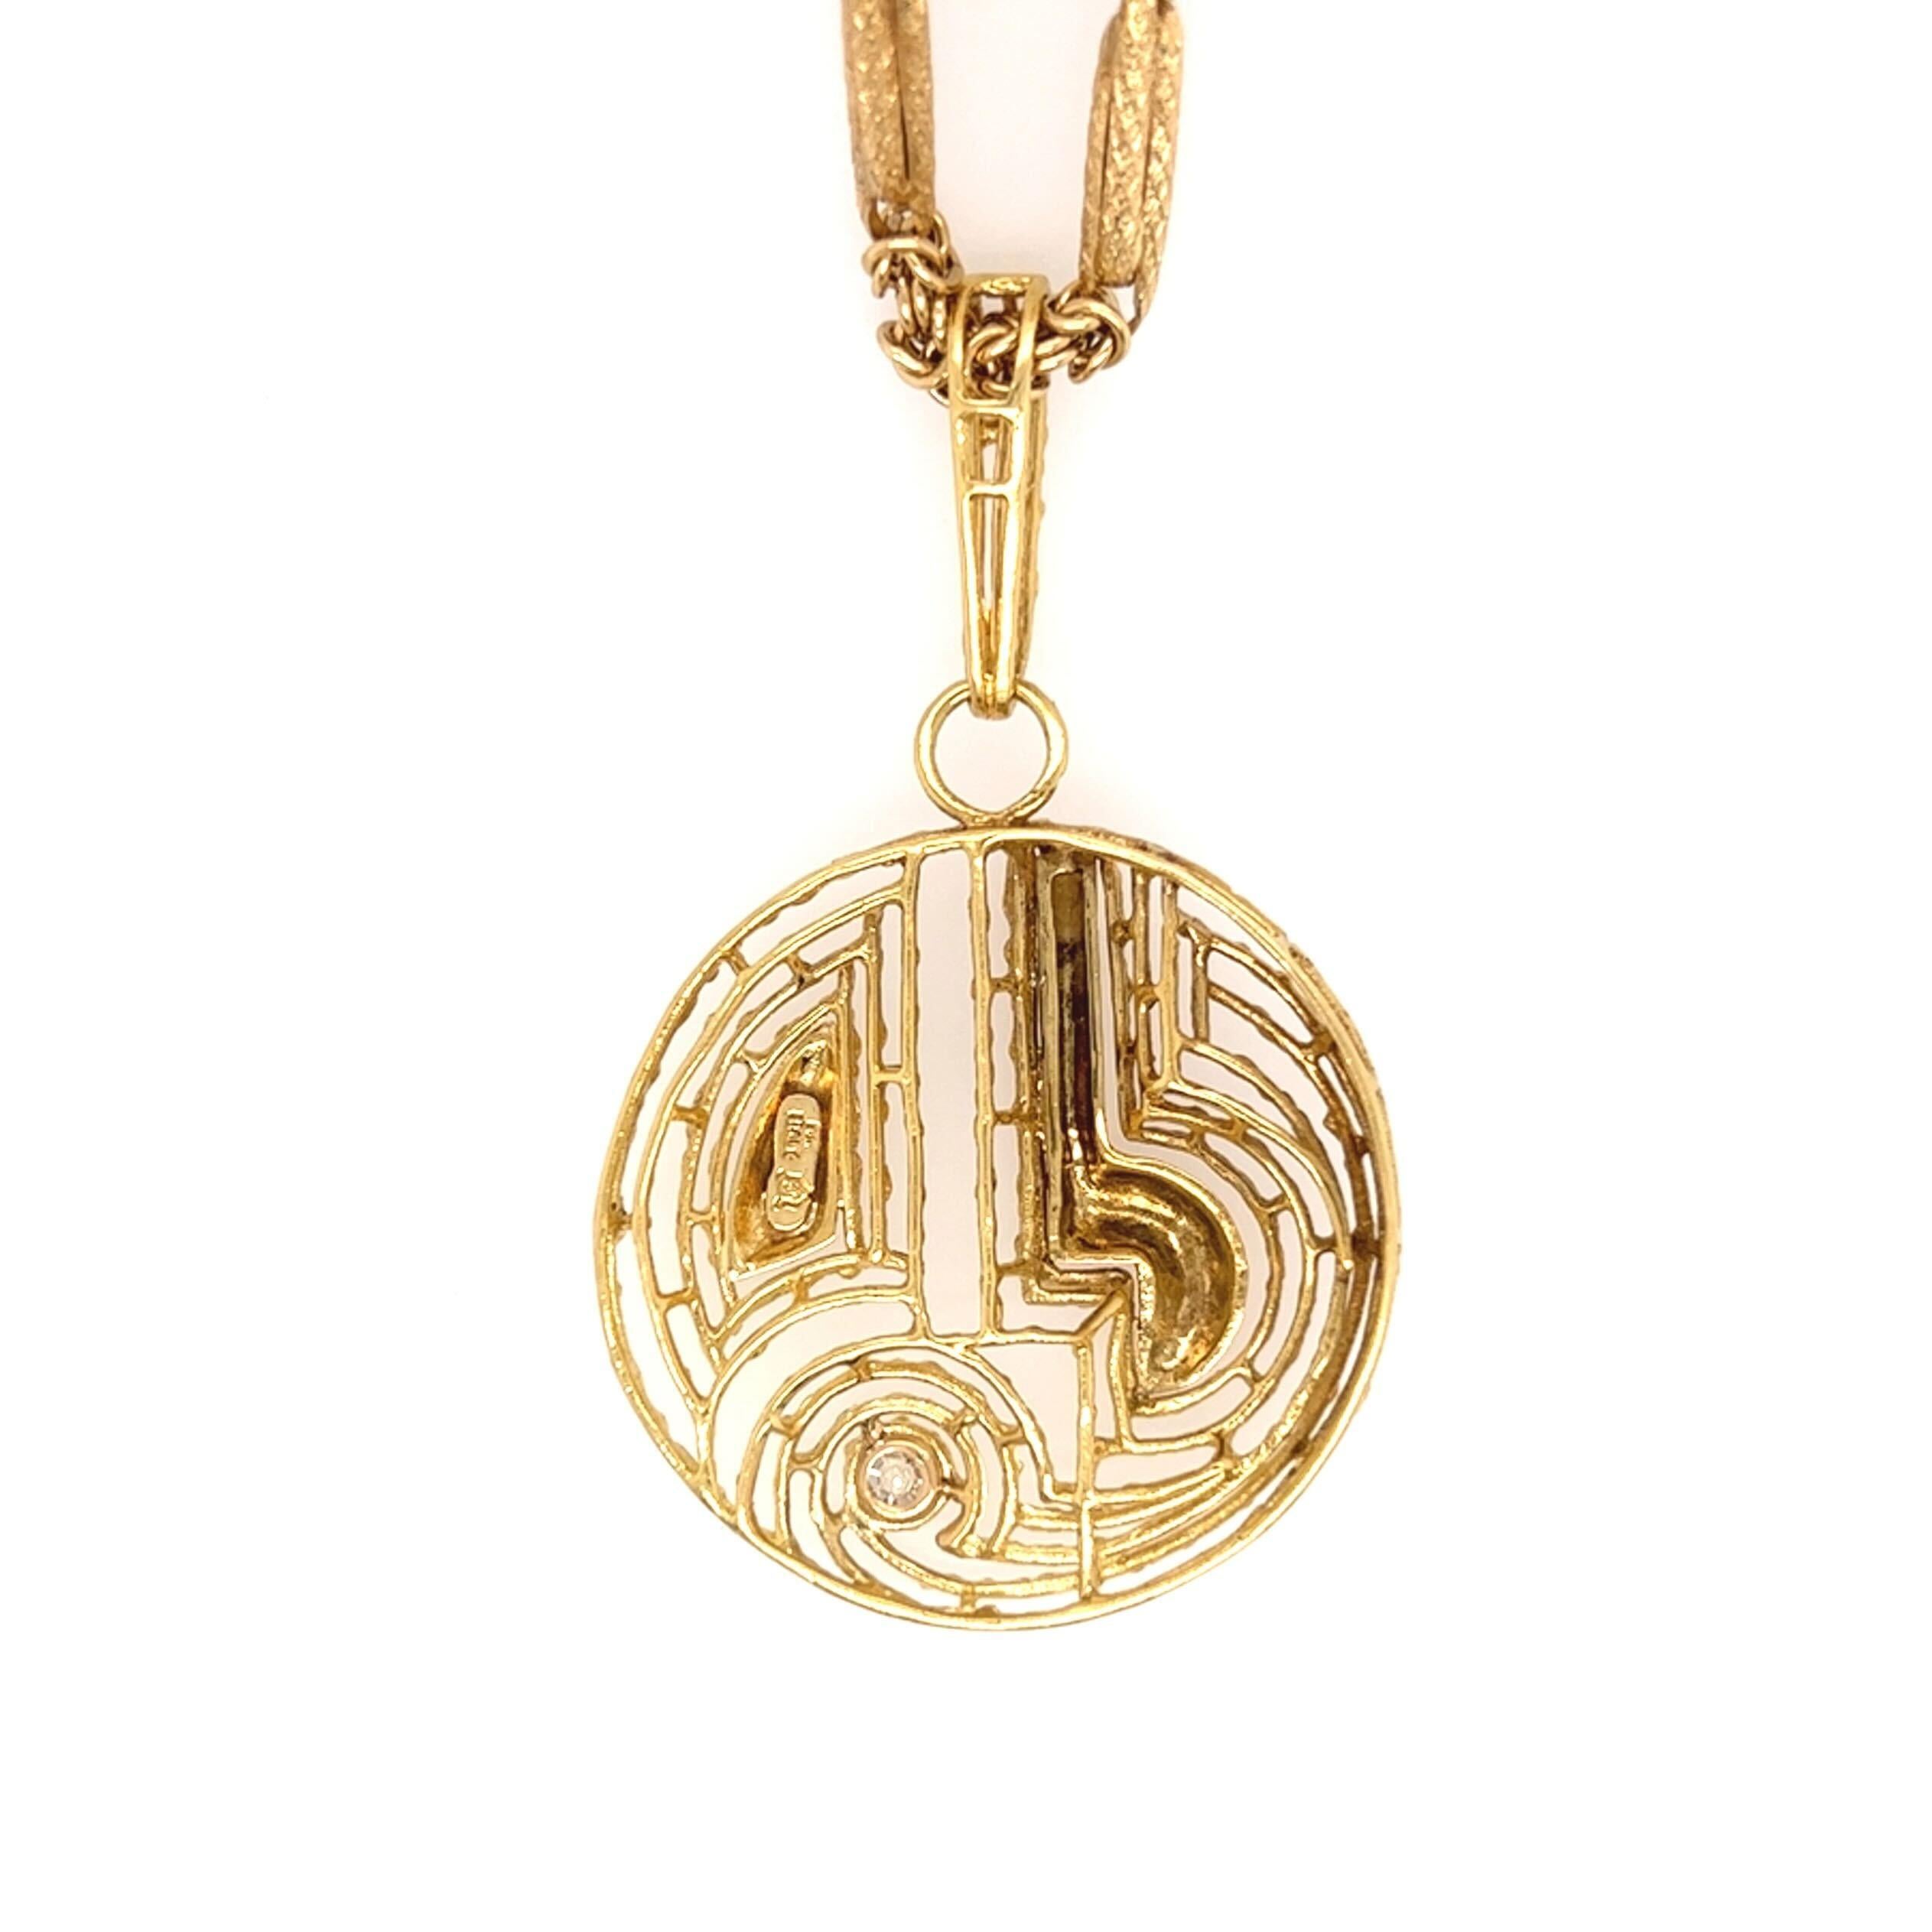 Round Cut A Yellow Gold and Diamond Pendant Necklace.